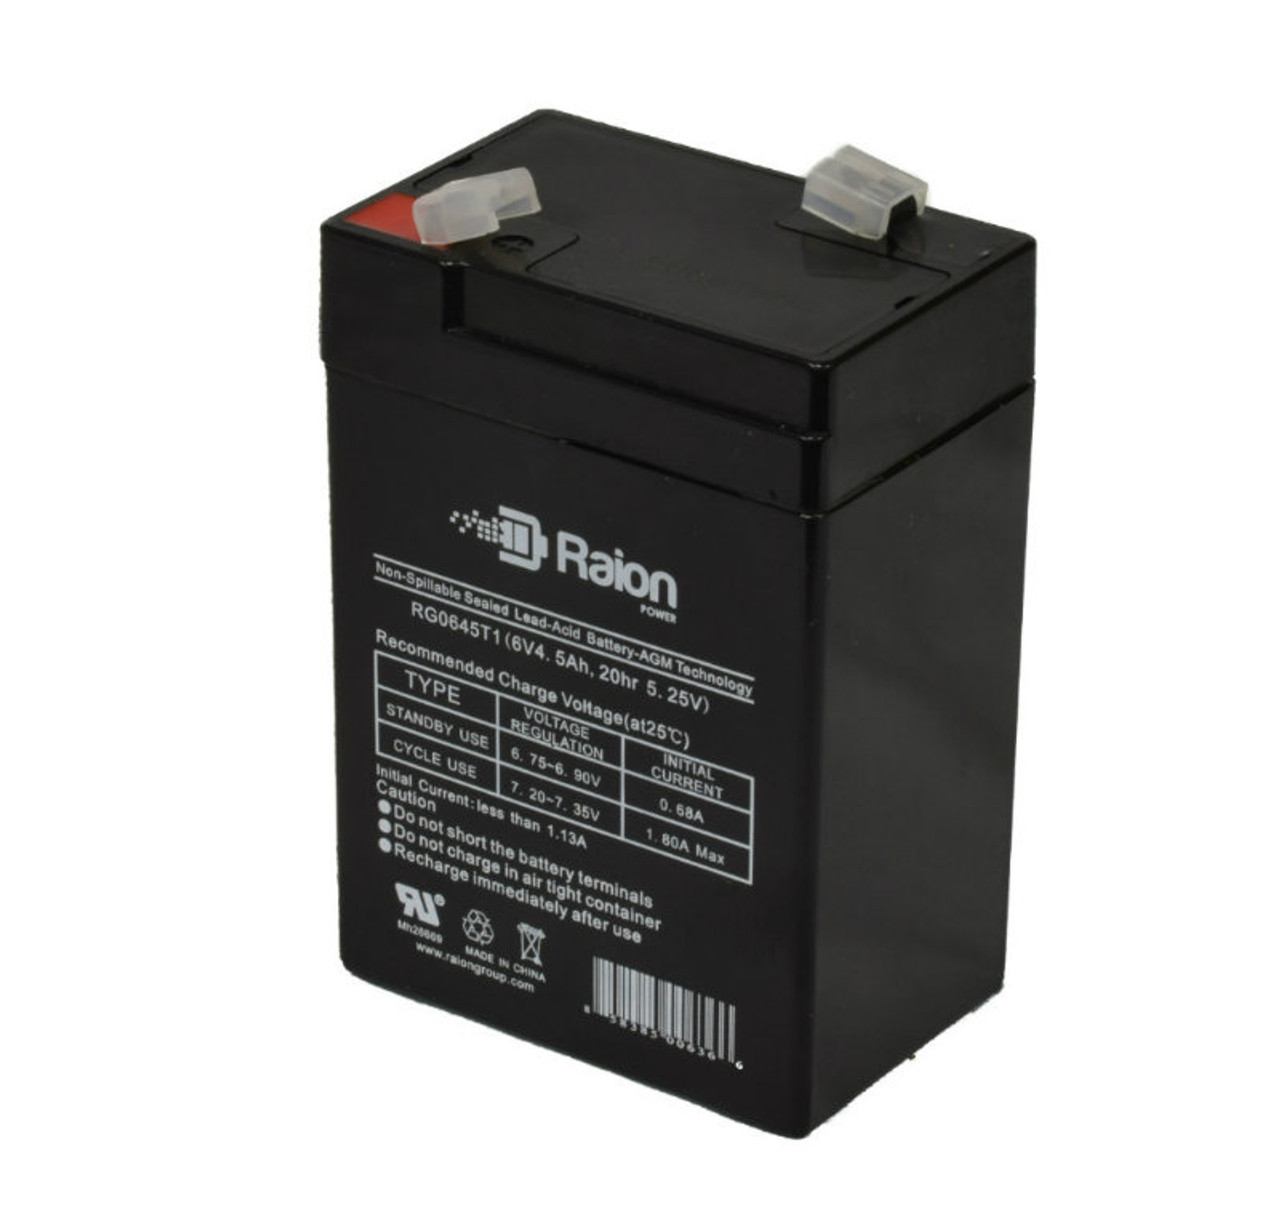 Raion Power RG0645T1 6V 4.5Ah Replacement Battery Cartridge for Discover D644